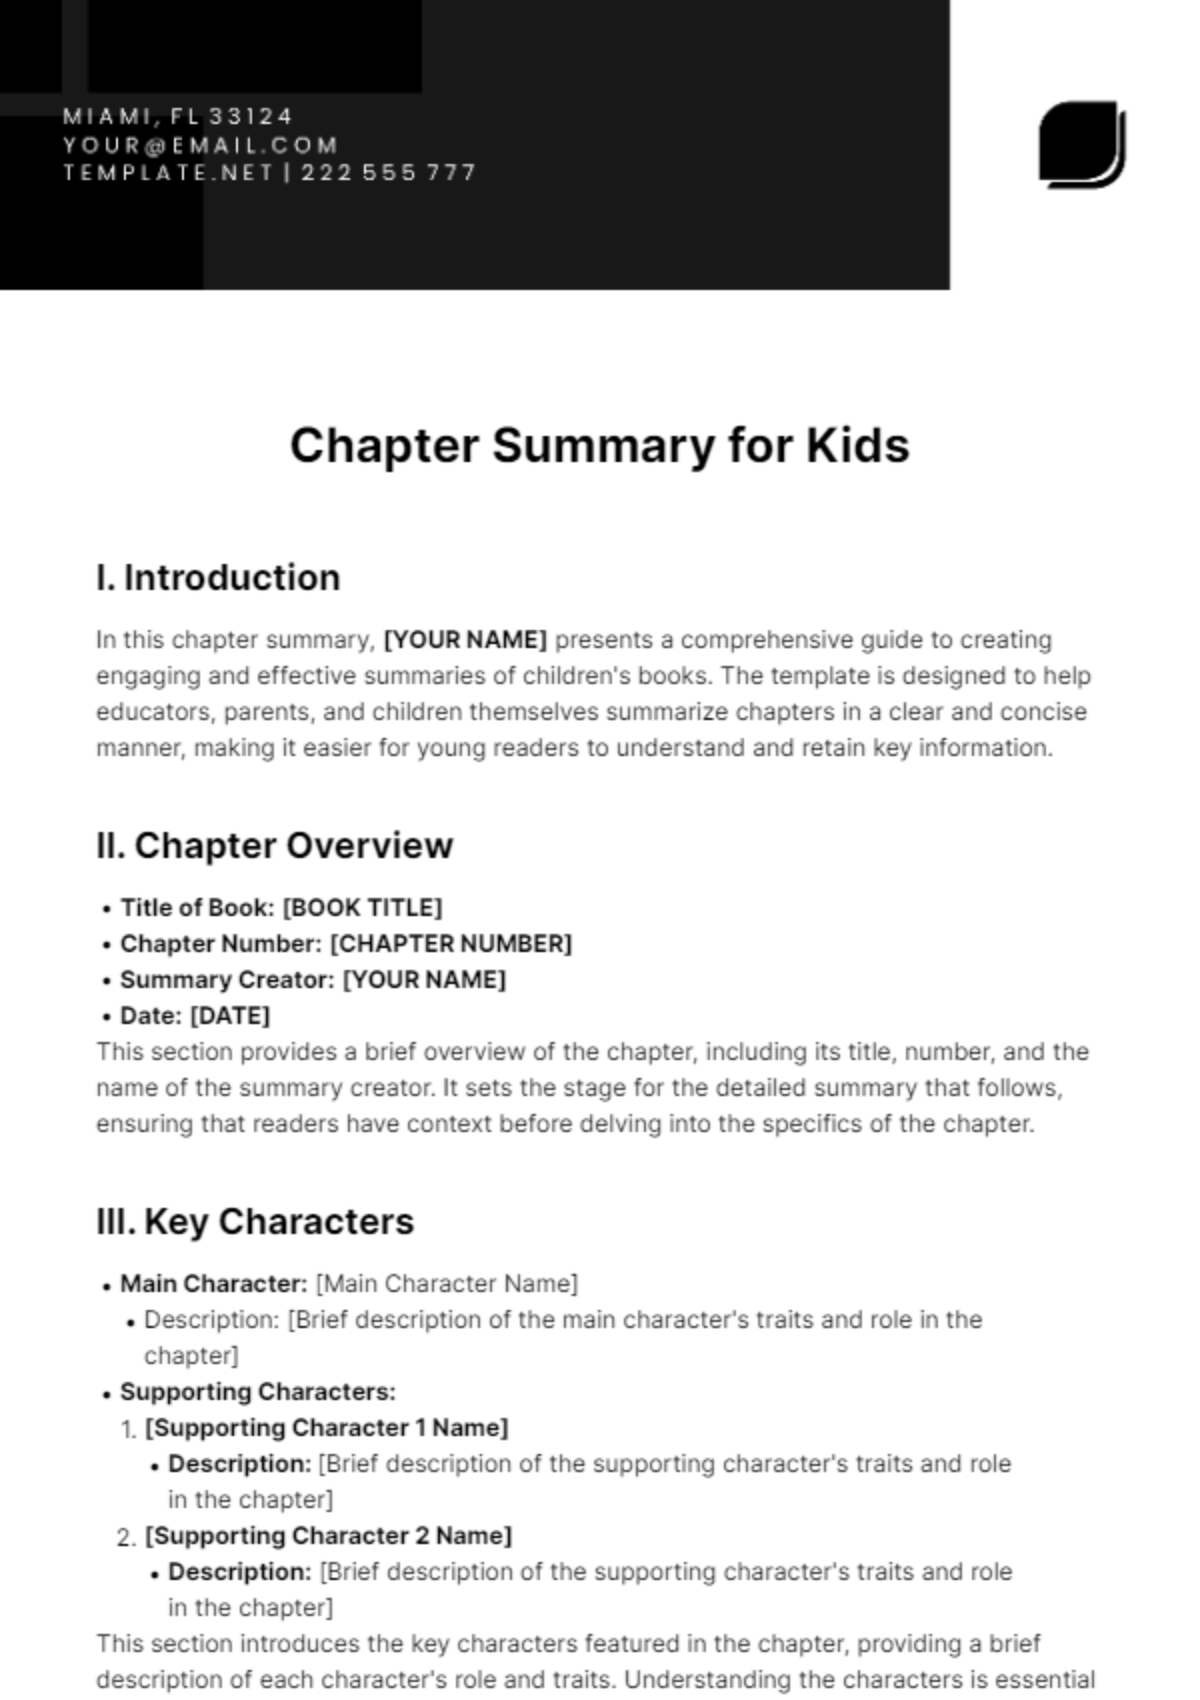 Chapter Summary for Kids Template